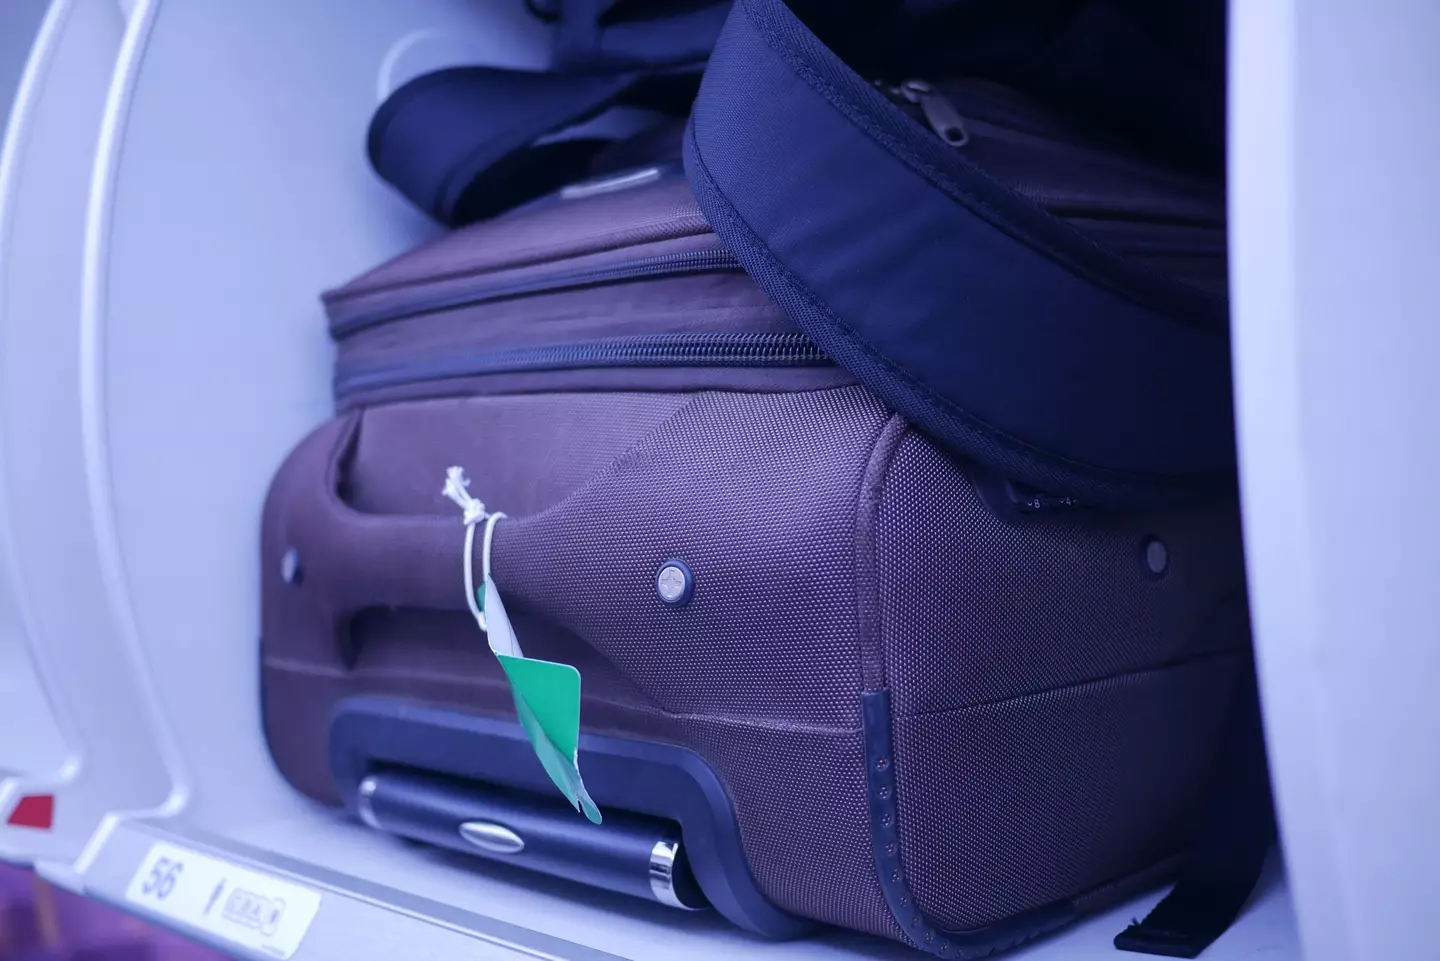 A flight attendant has explained why staff don’t stow luggage for passengers.